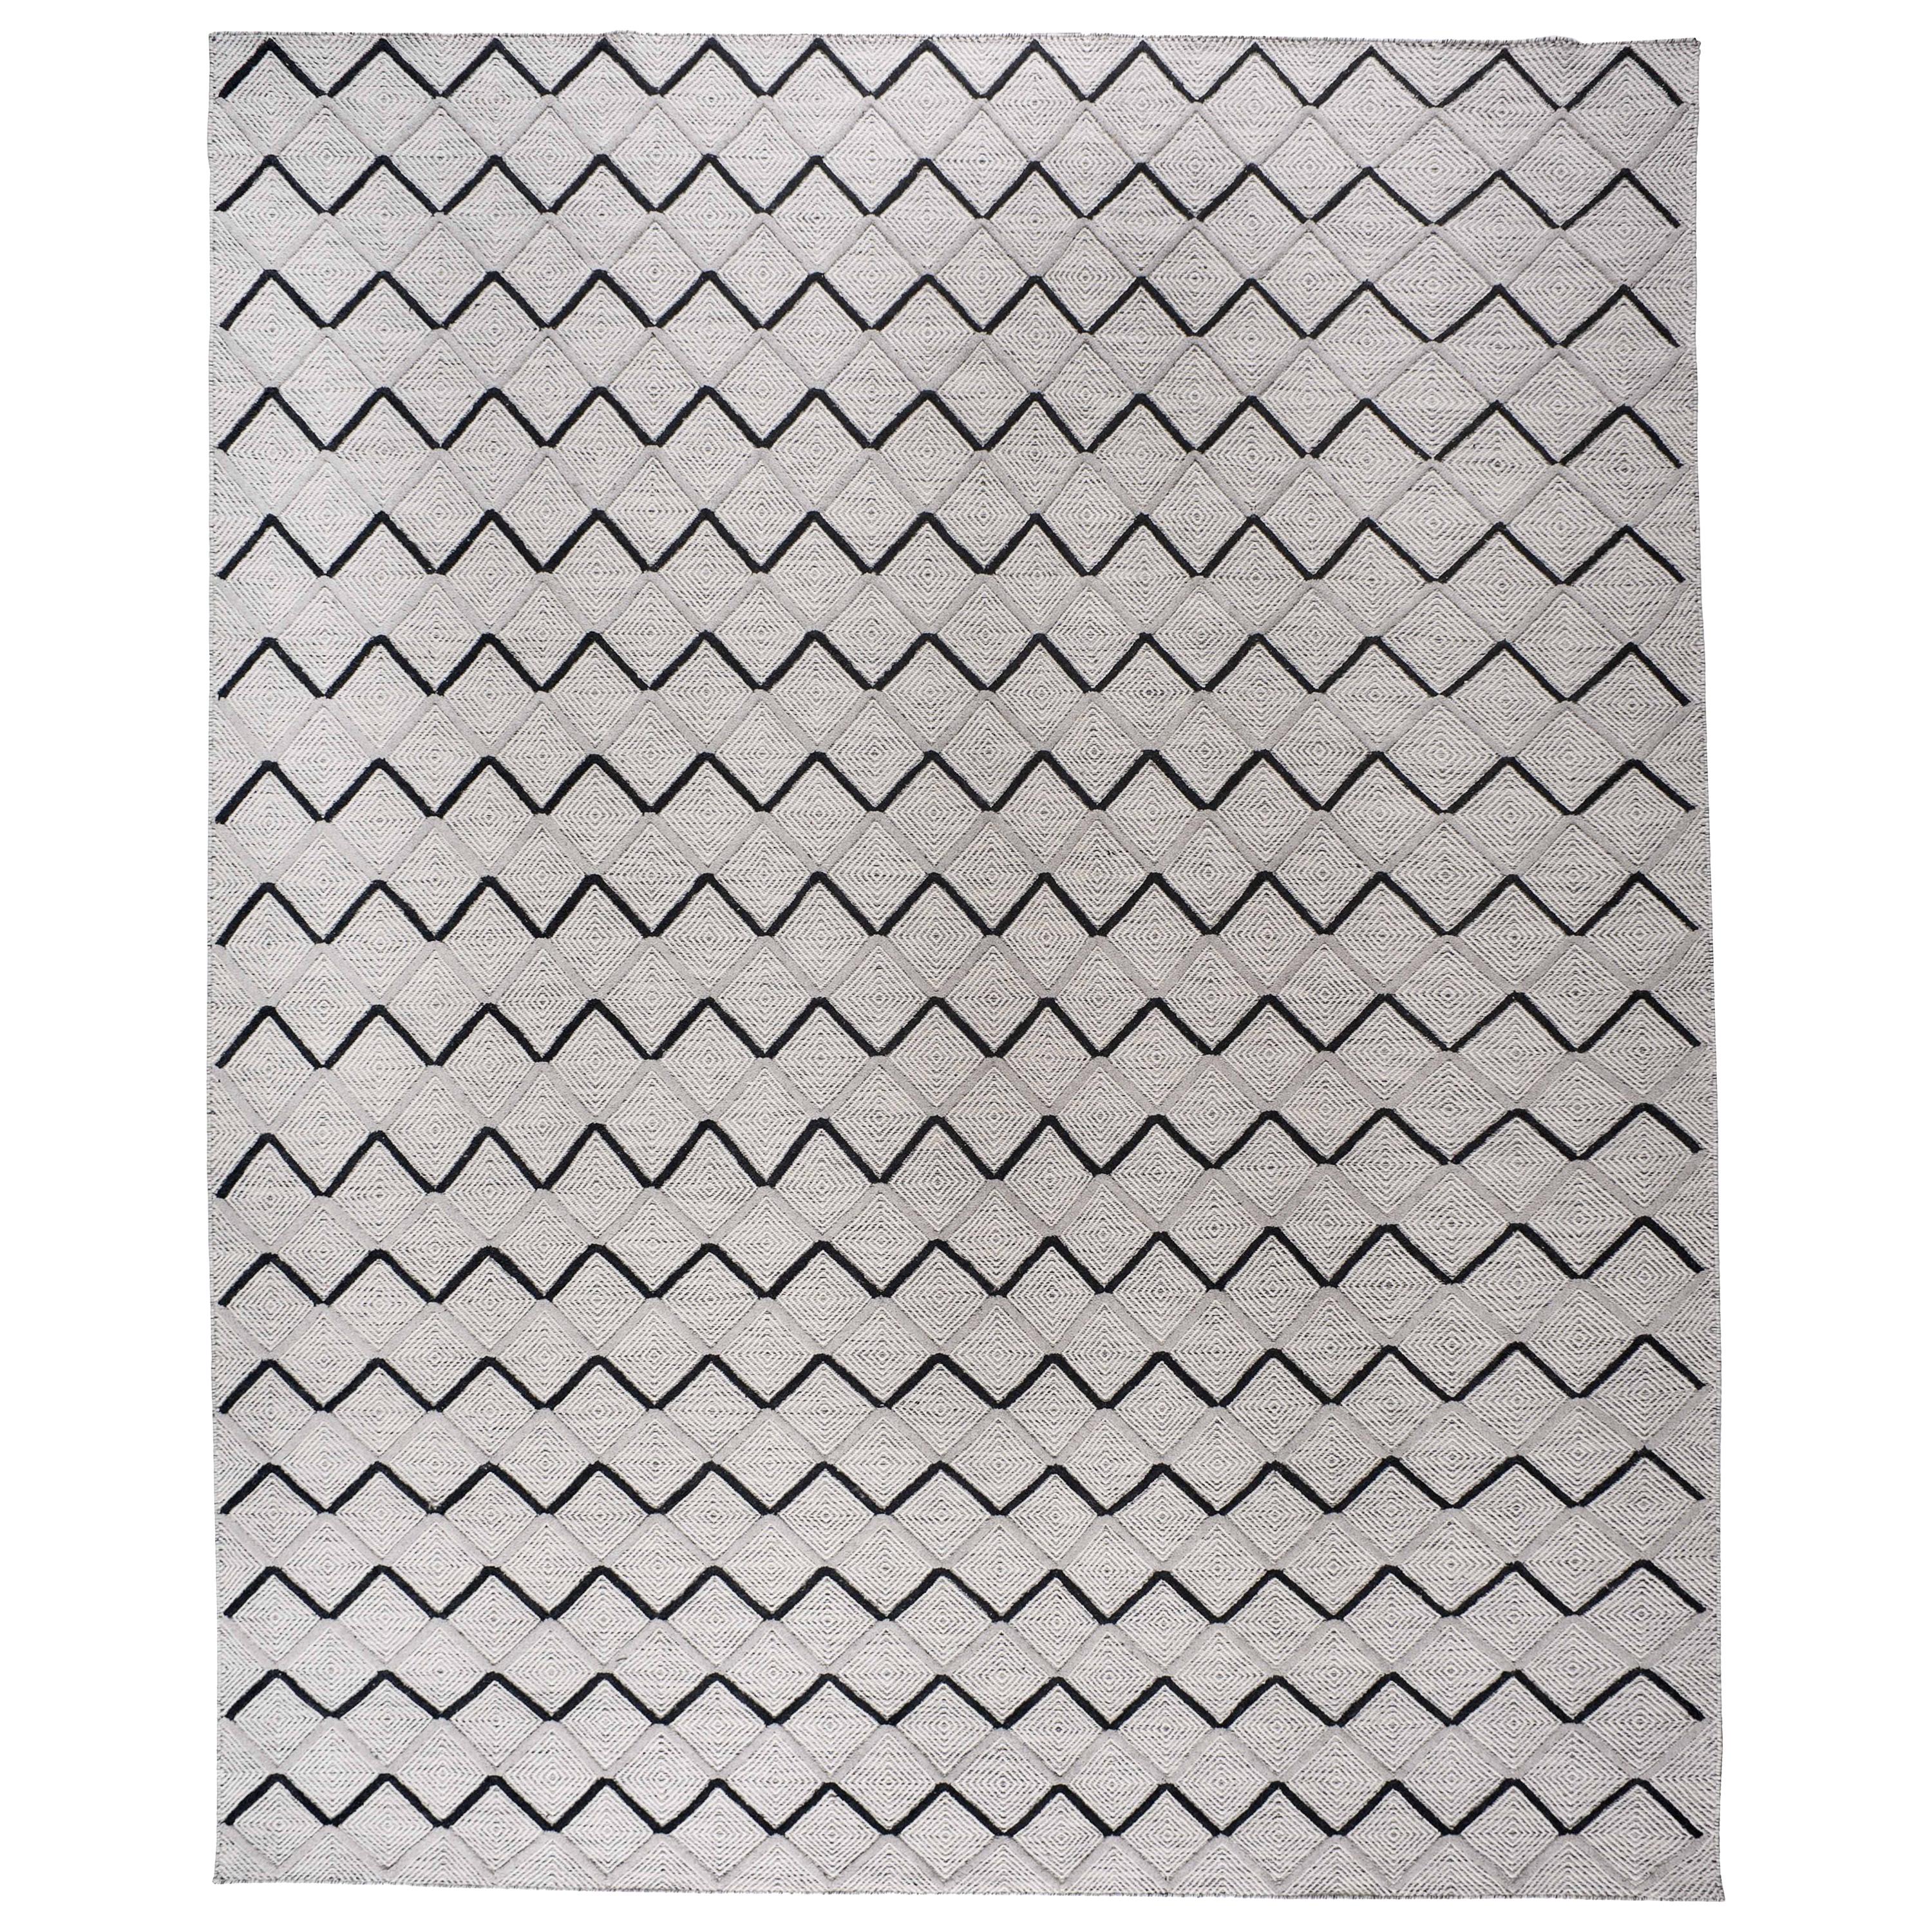 Black and White Diamonds Wool Area Rug For Sale